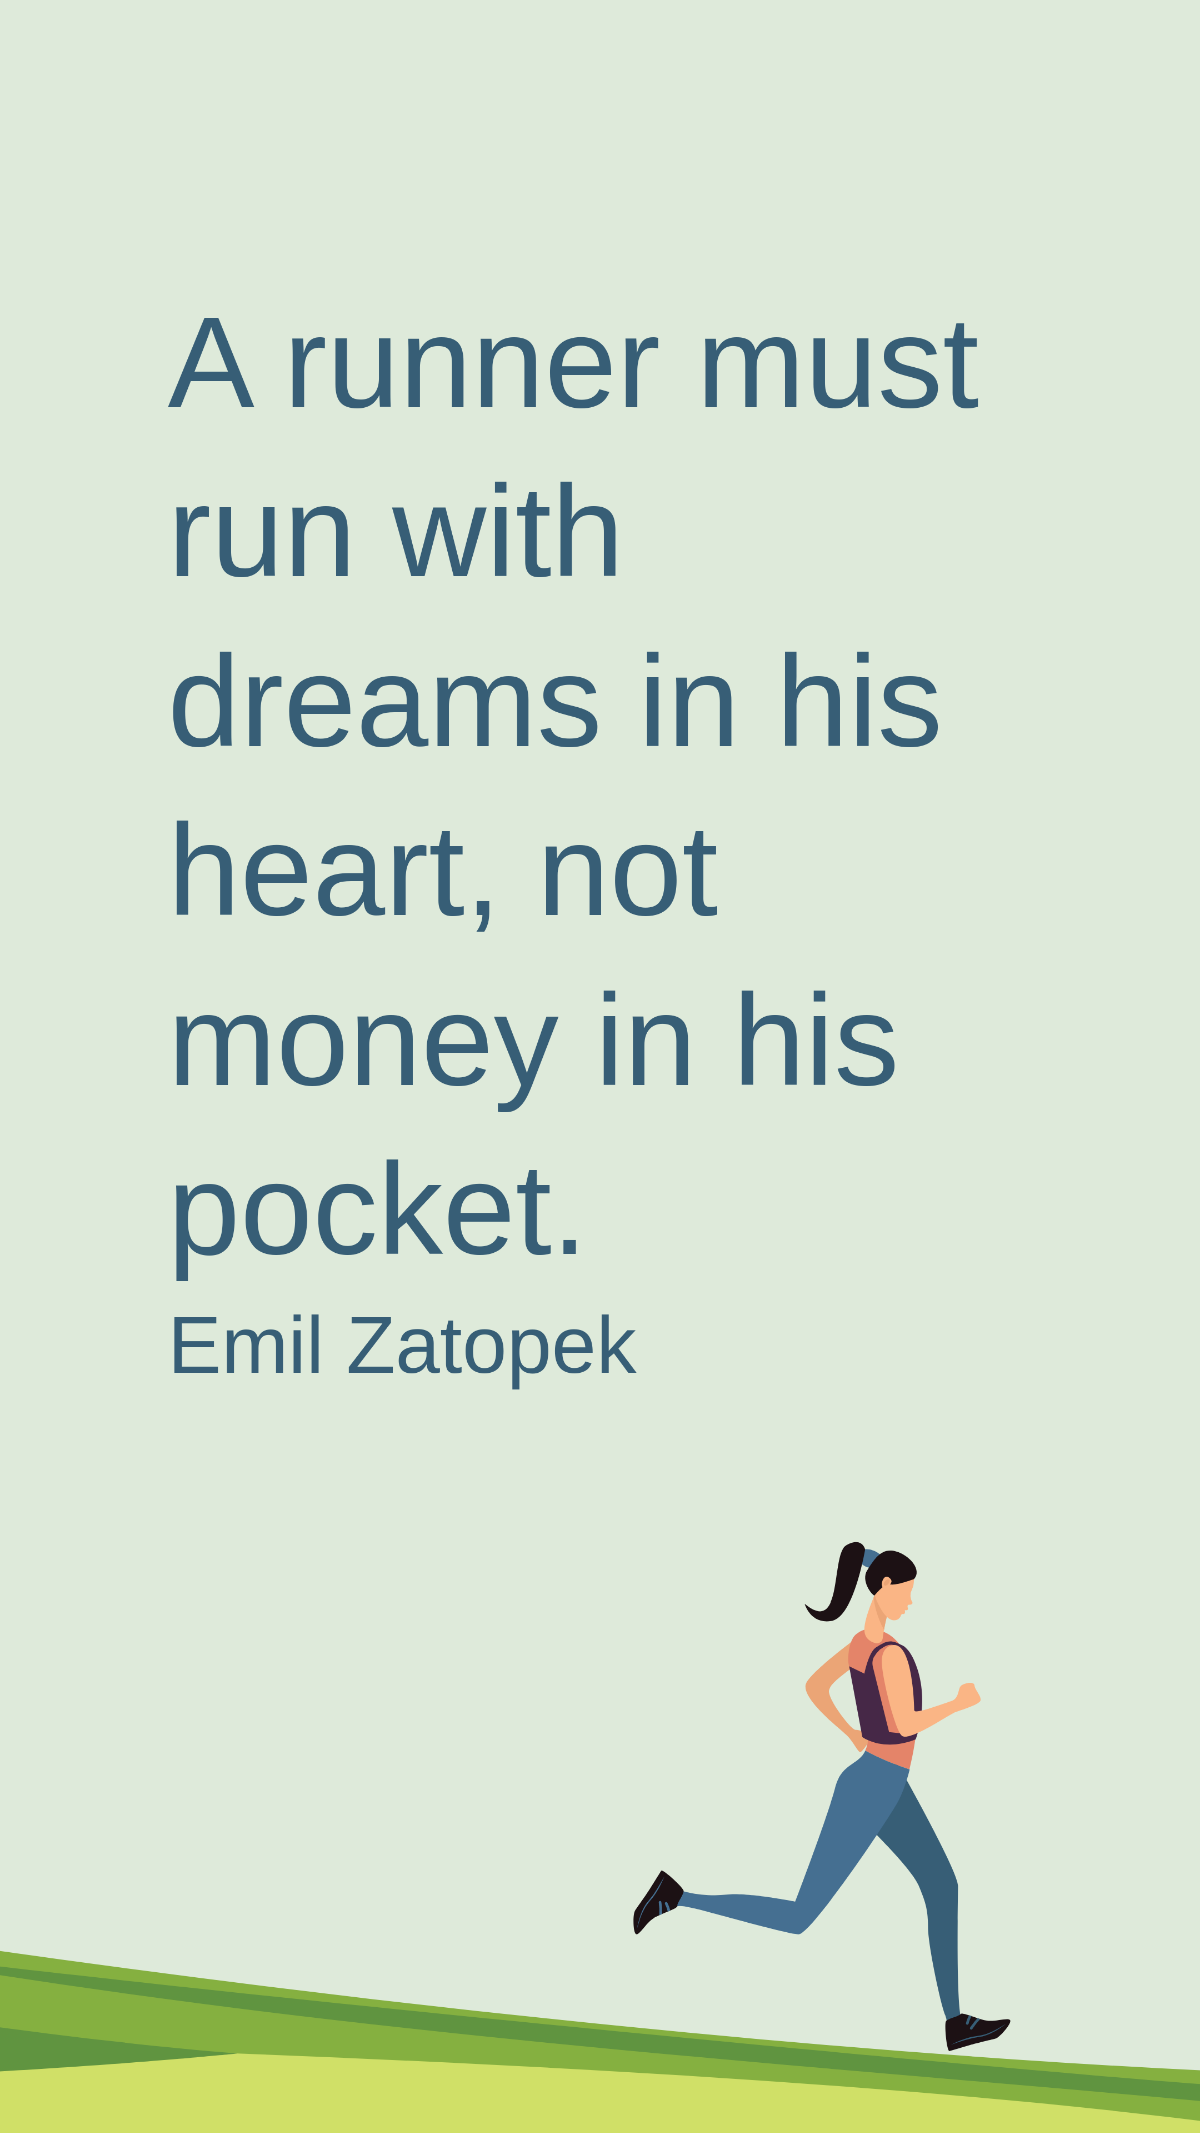 Emil Zatopek - A runner must run with dreams in his heart, not money in his pocket.